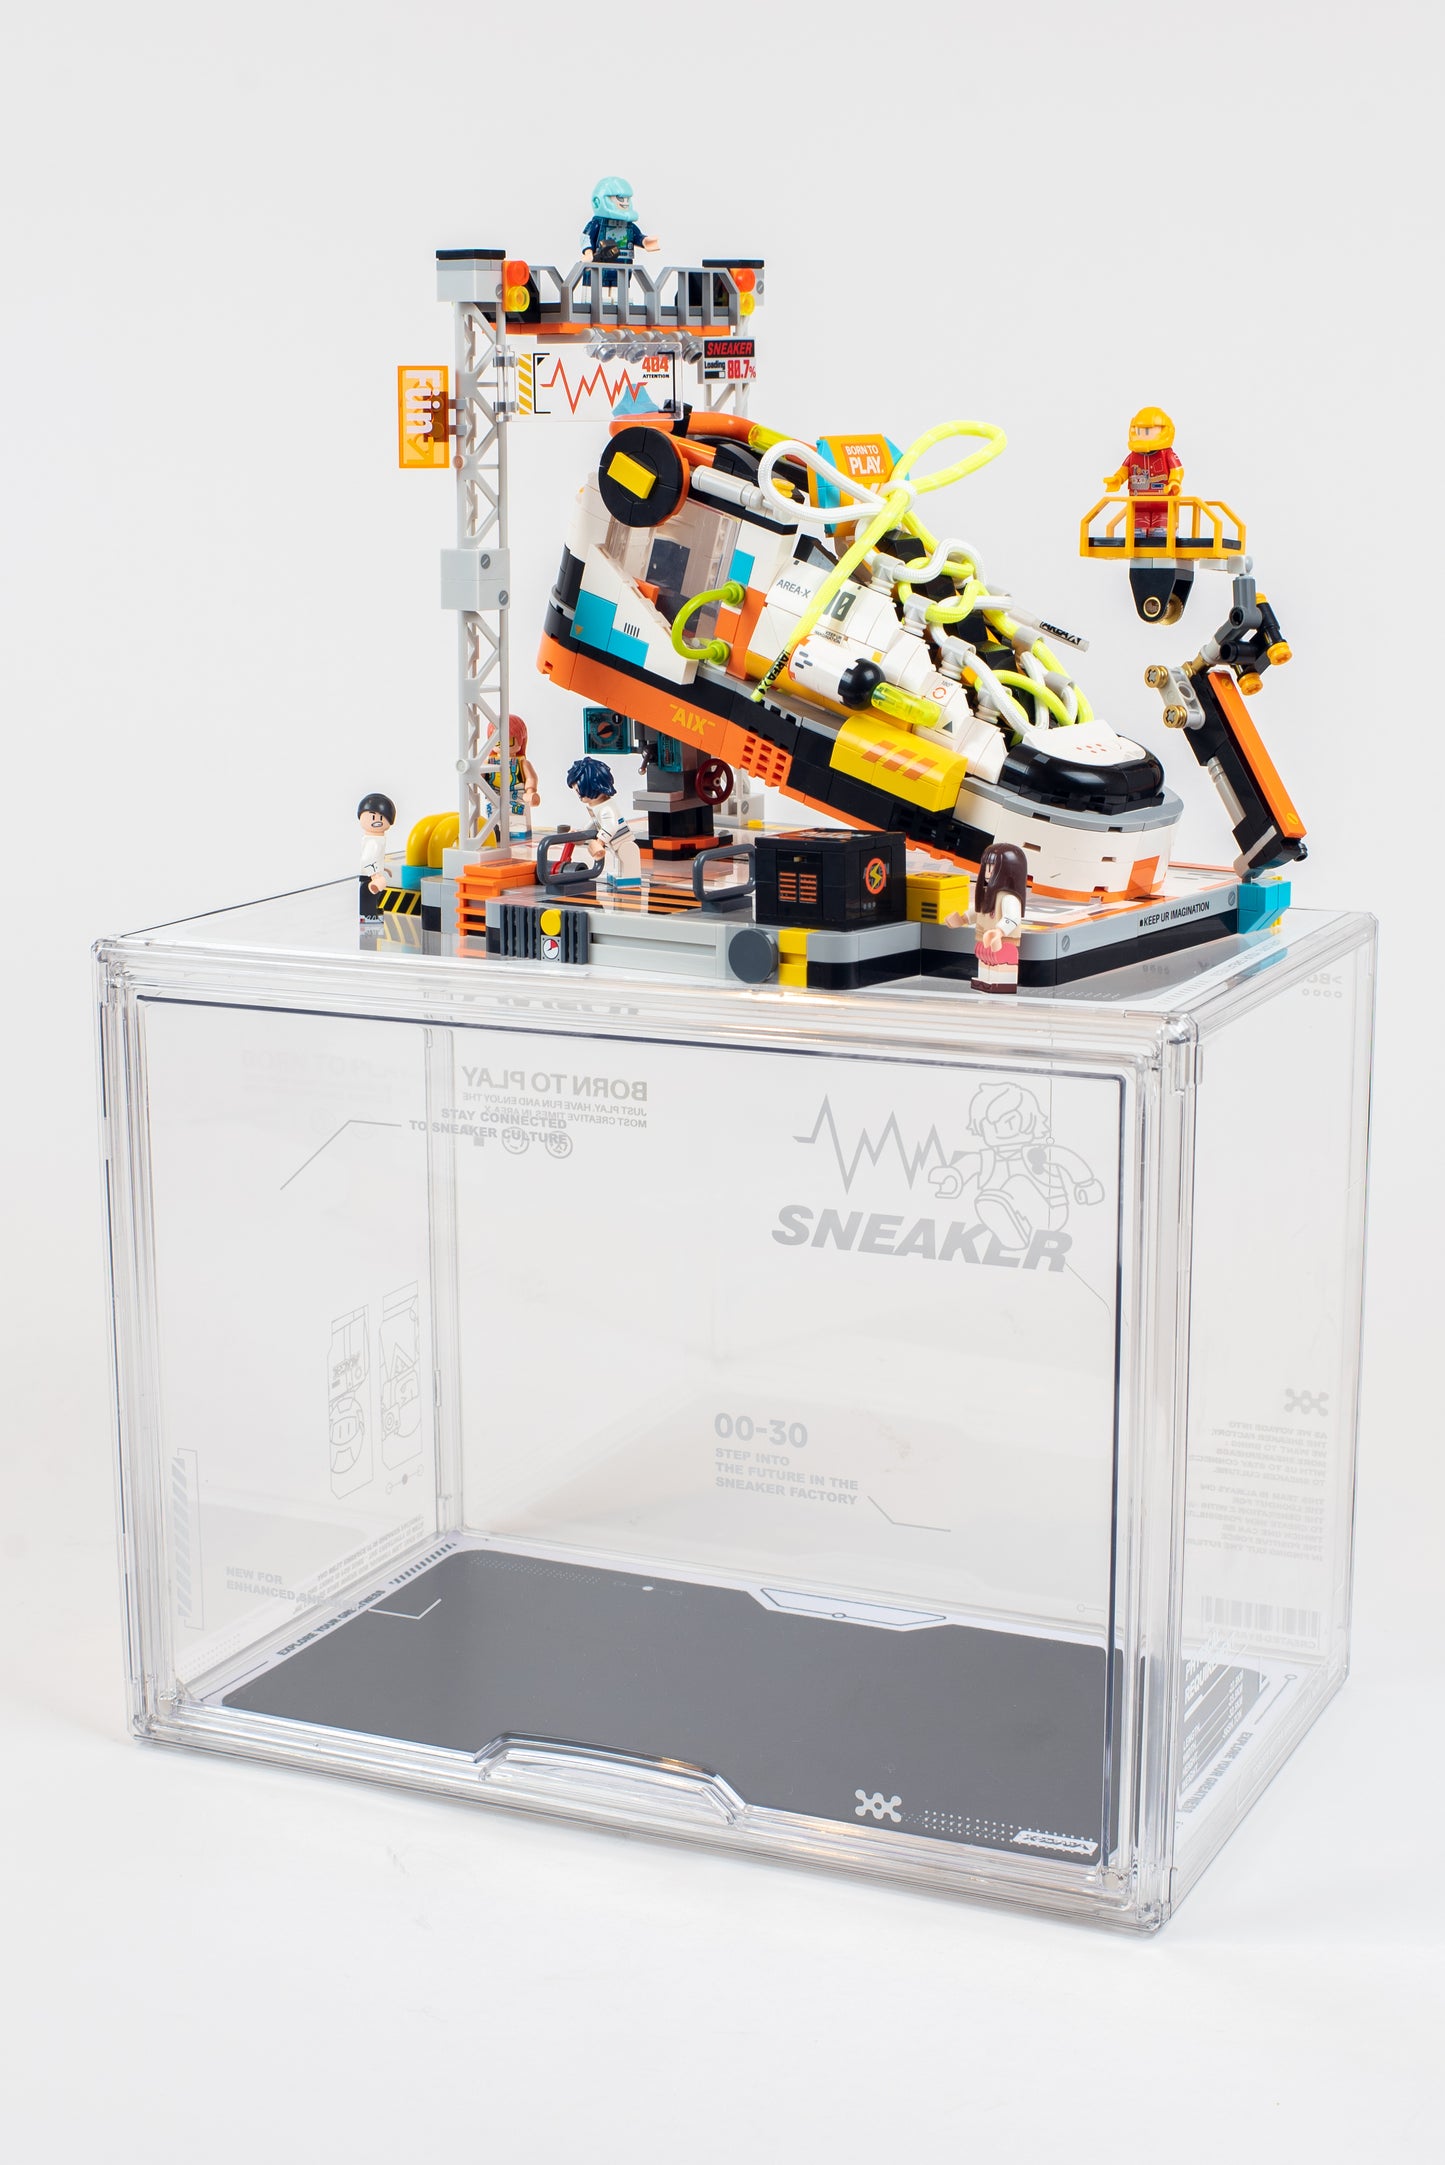 Sneaker Factory Bricks with Clear Display Case